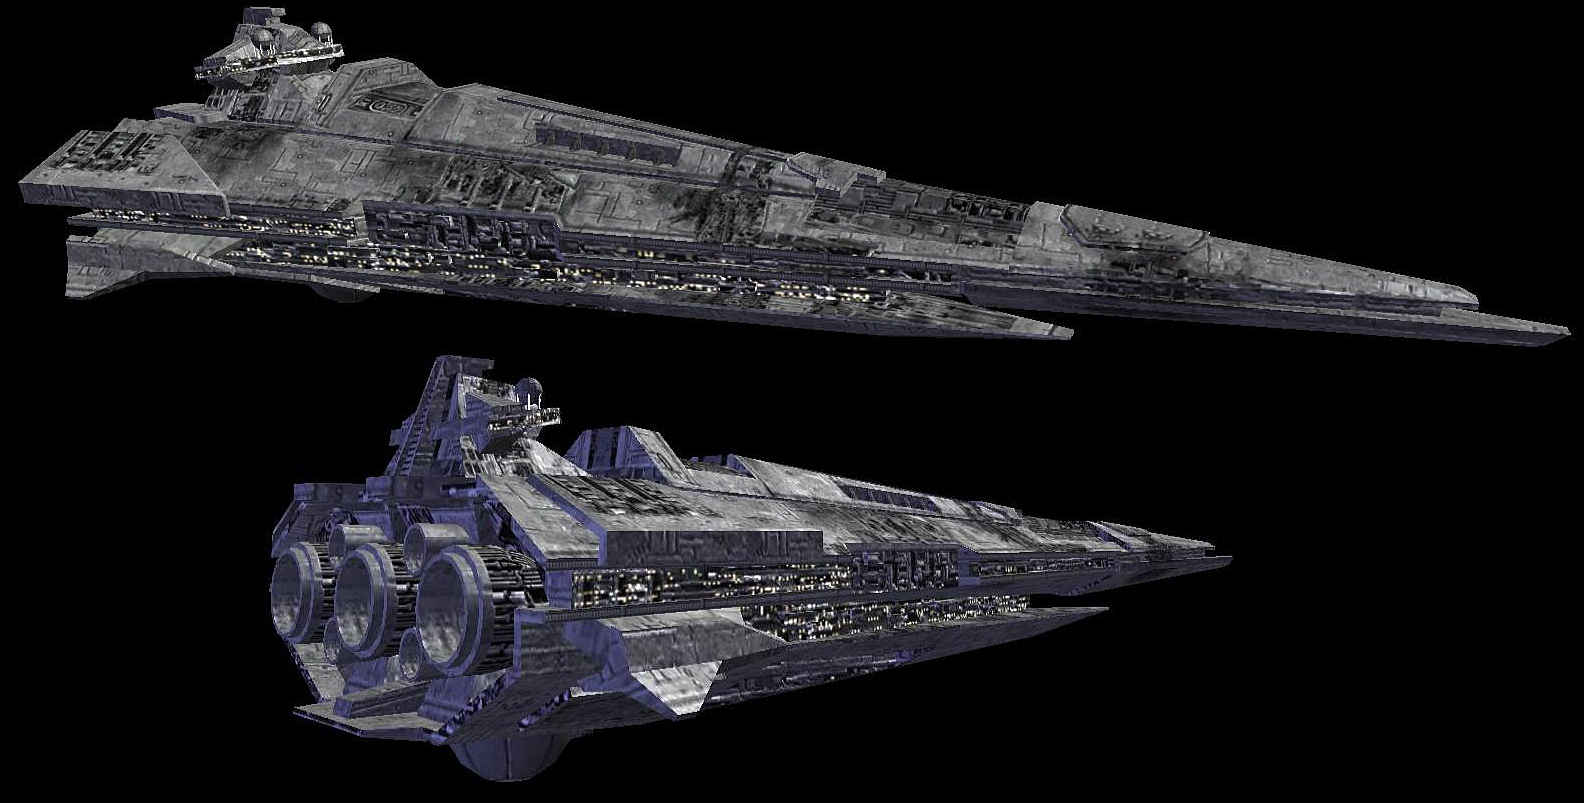 new-ravager-skin-image-old-republic-at-war-mod-for-star-wars-empire-at-war-forces-of